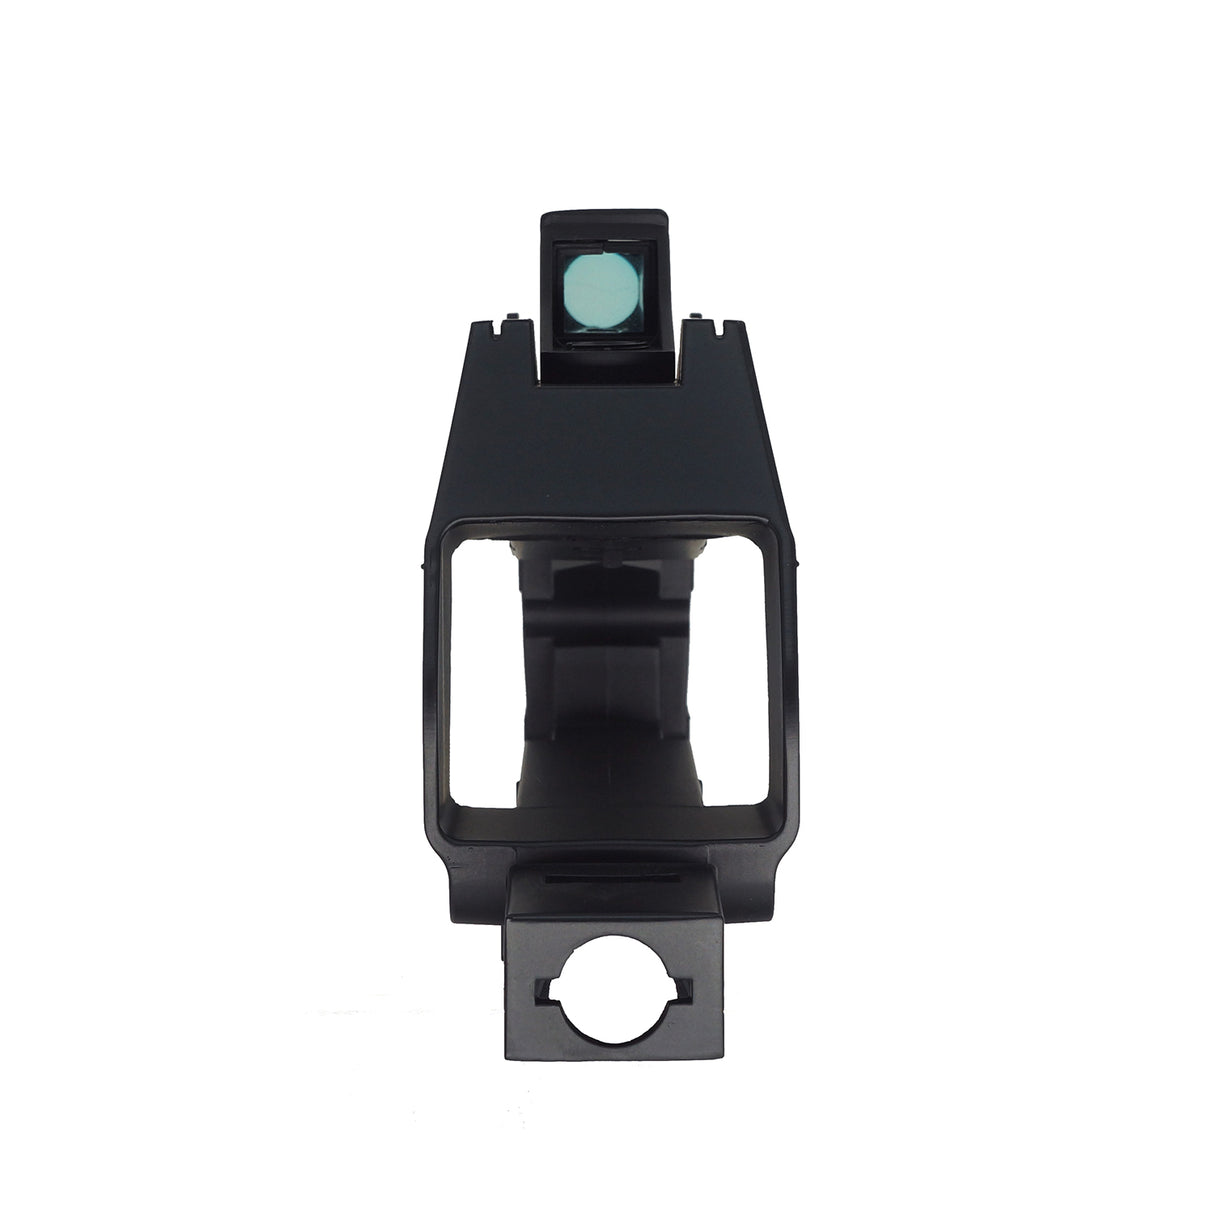 CYMA P90 Receiver with Red Dot Sight ( CYMA-C123 )